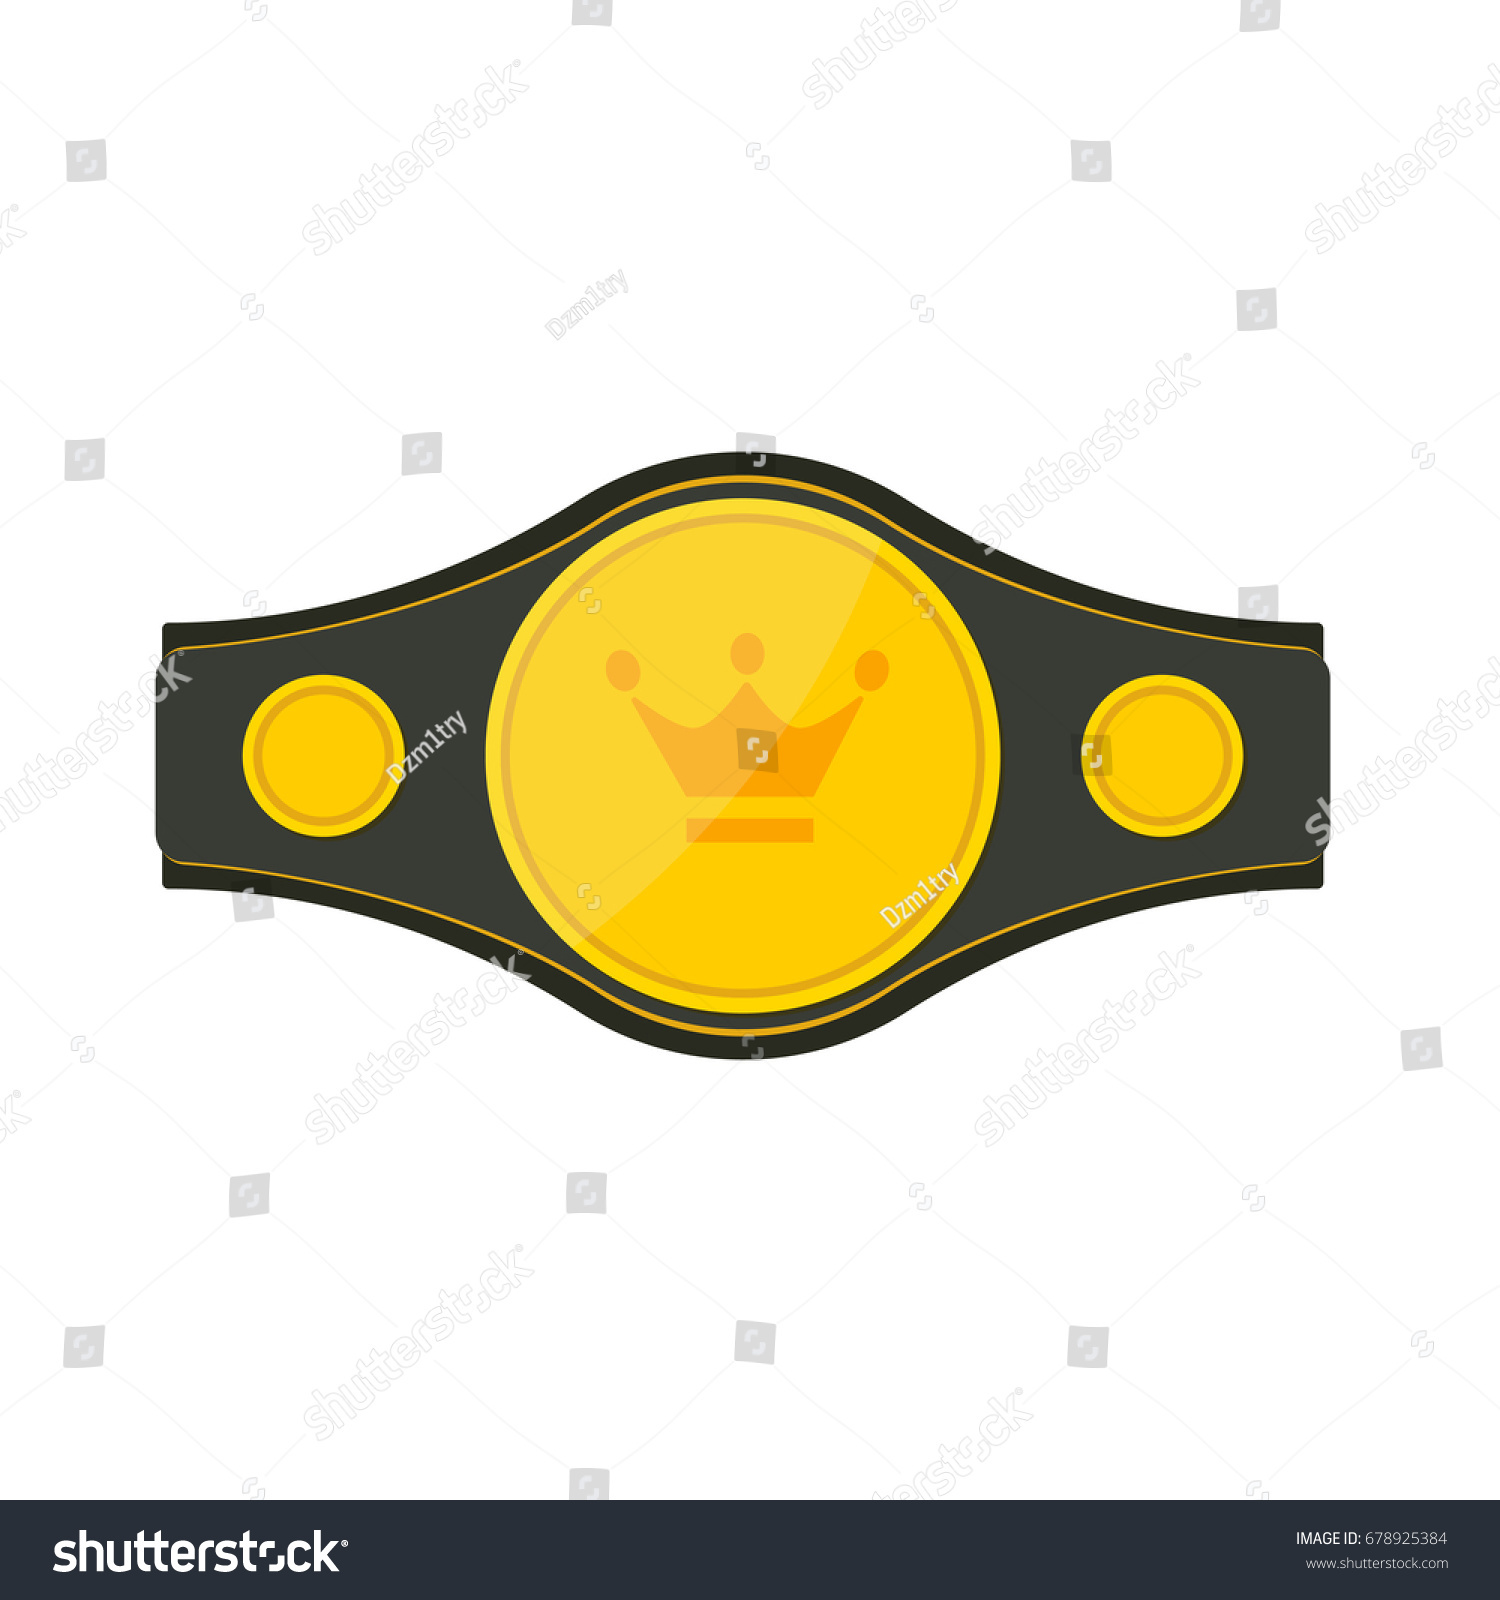 SVG of boxing belt icon. Vector illustration isolated on white background svg